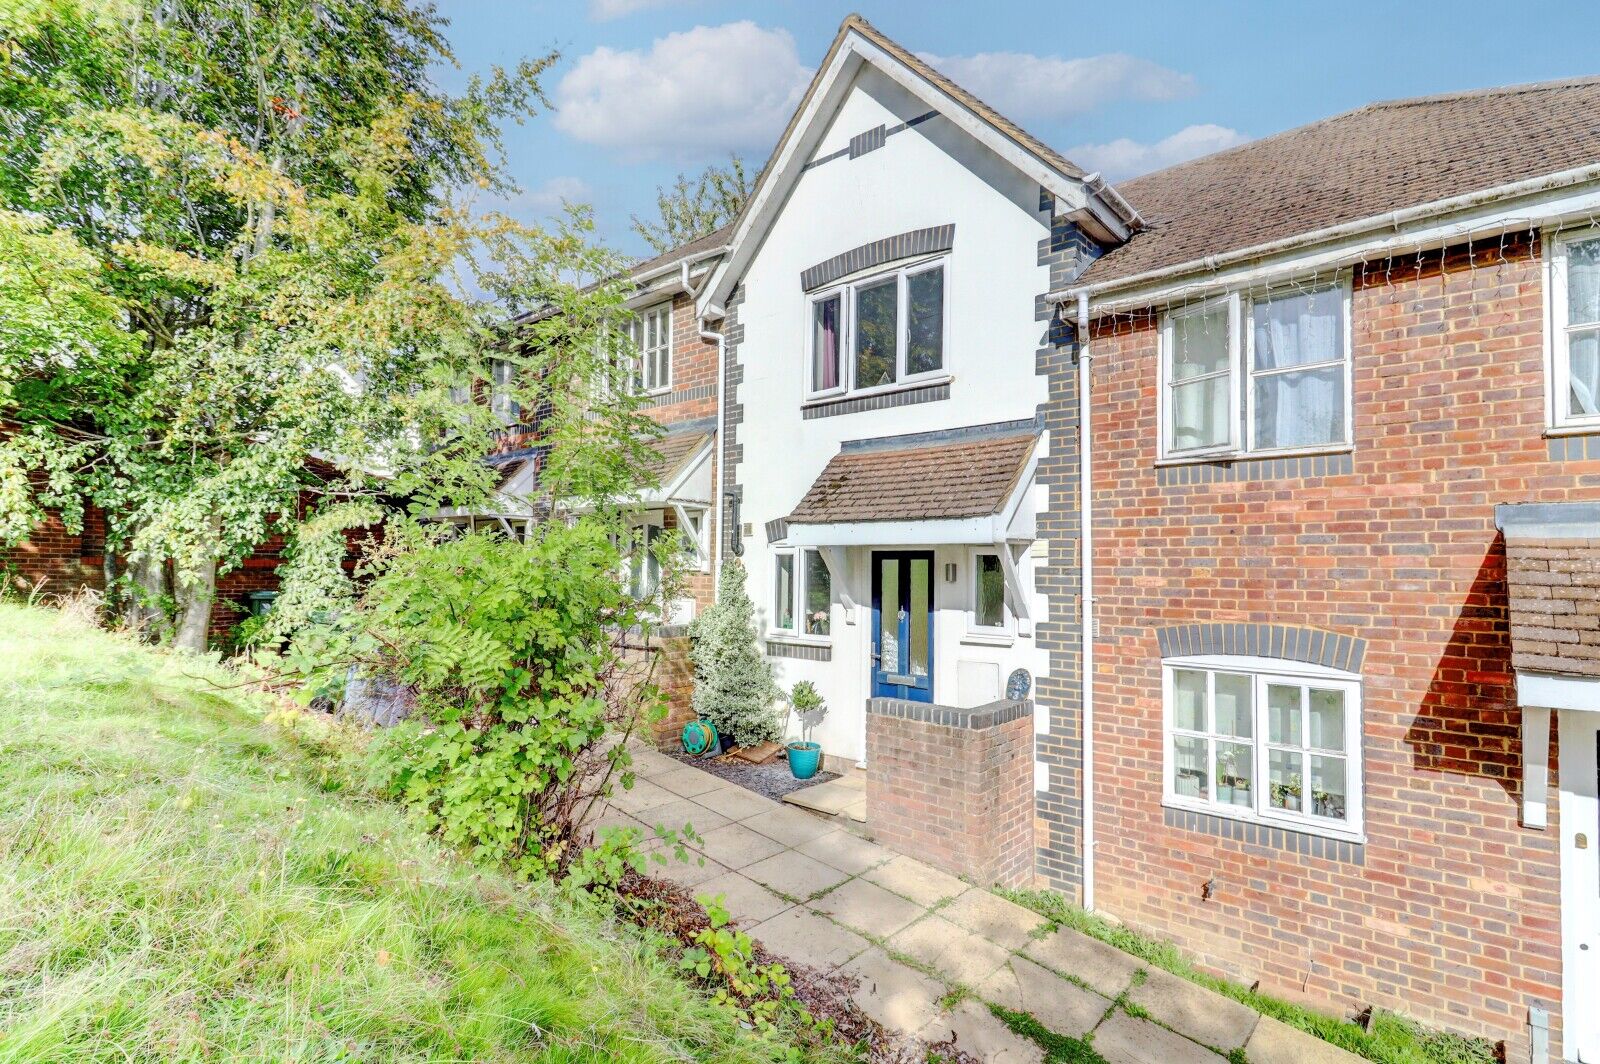 2 bedroom mid terraced house for sale Wheelers Park, High Wycombe, HP13, main image